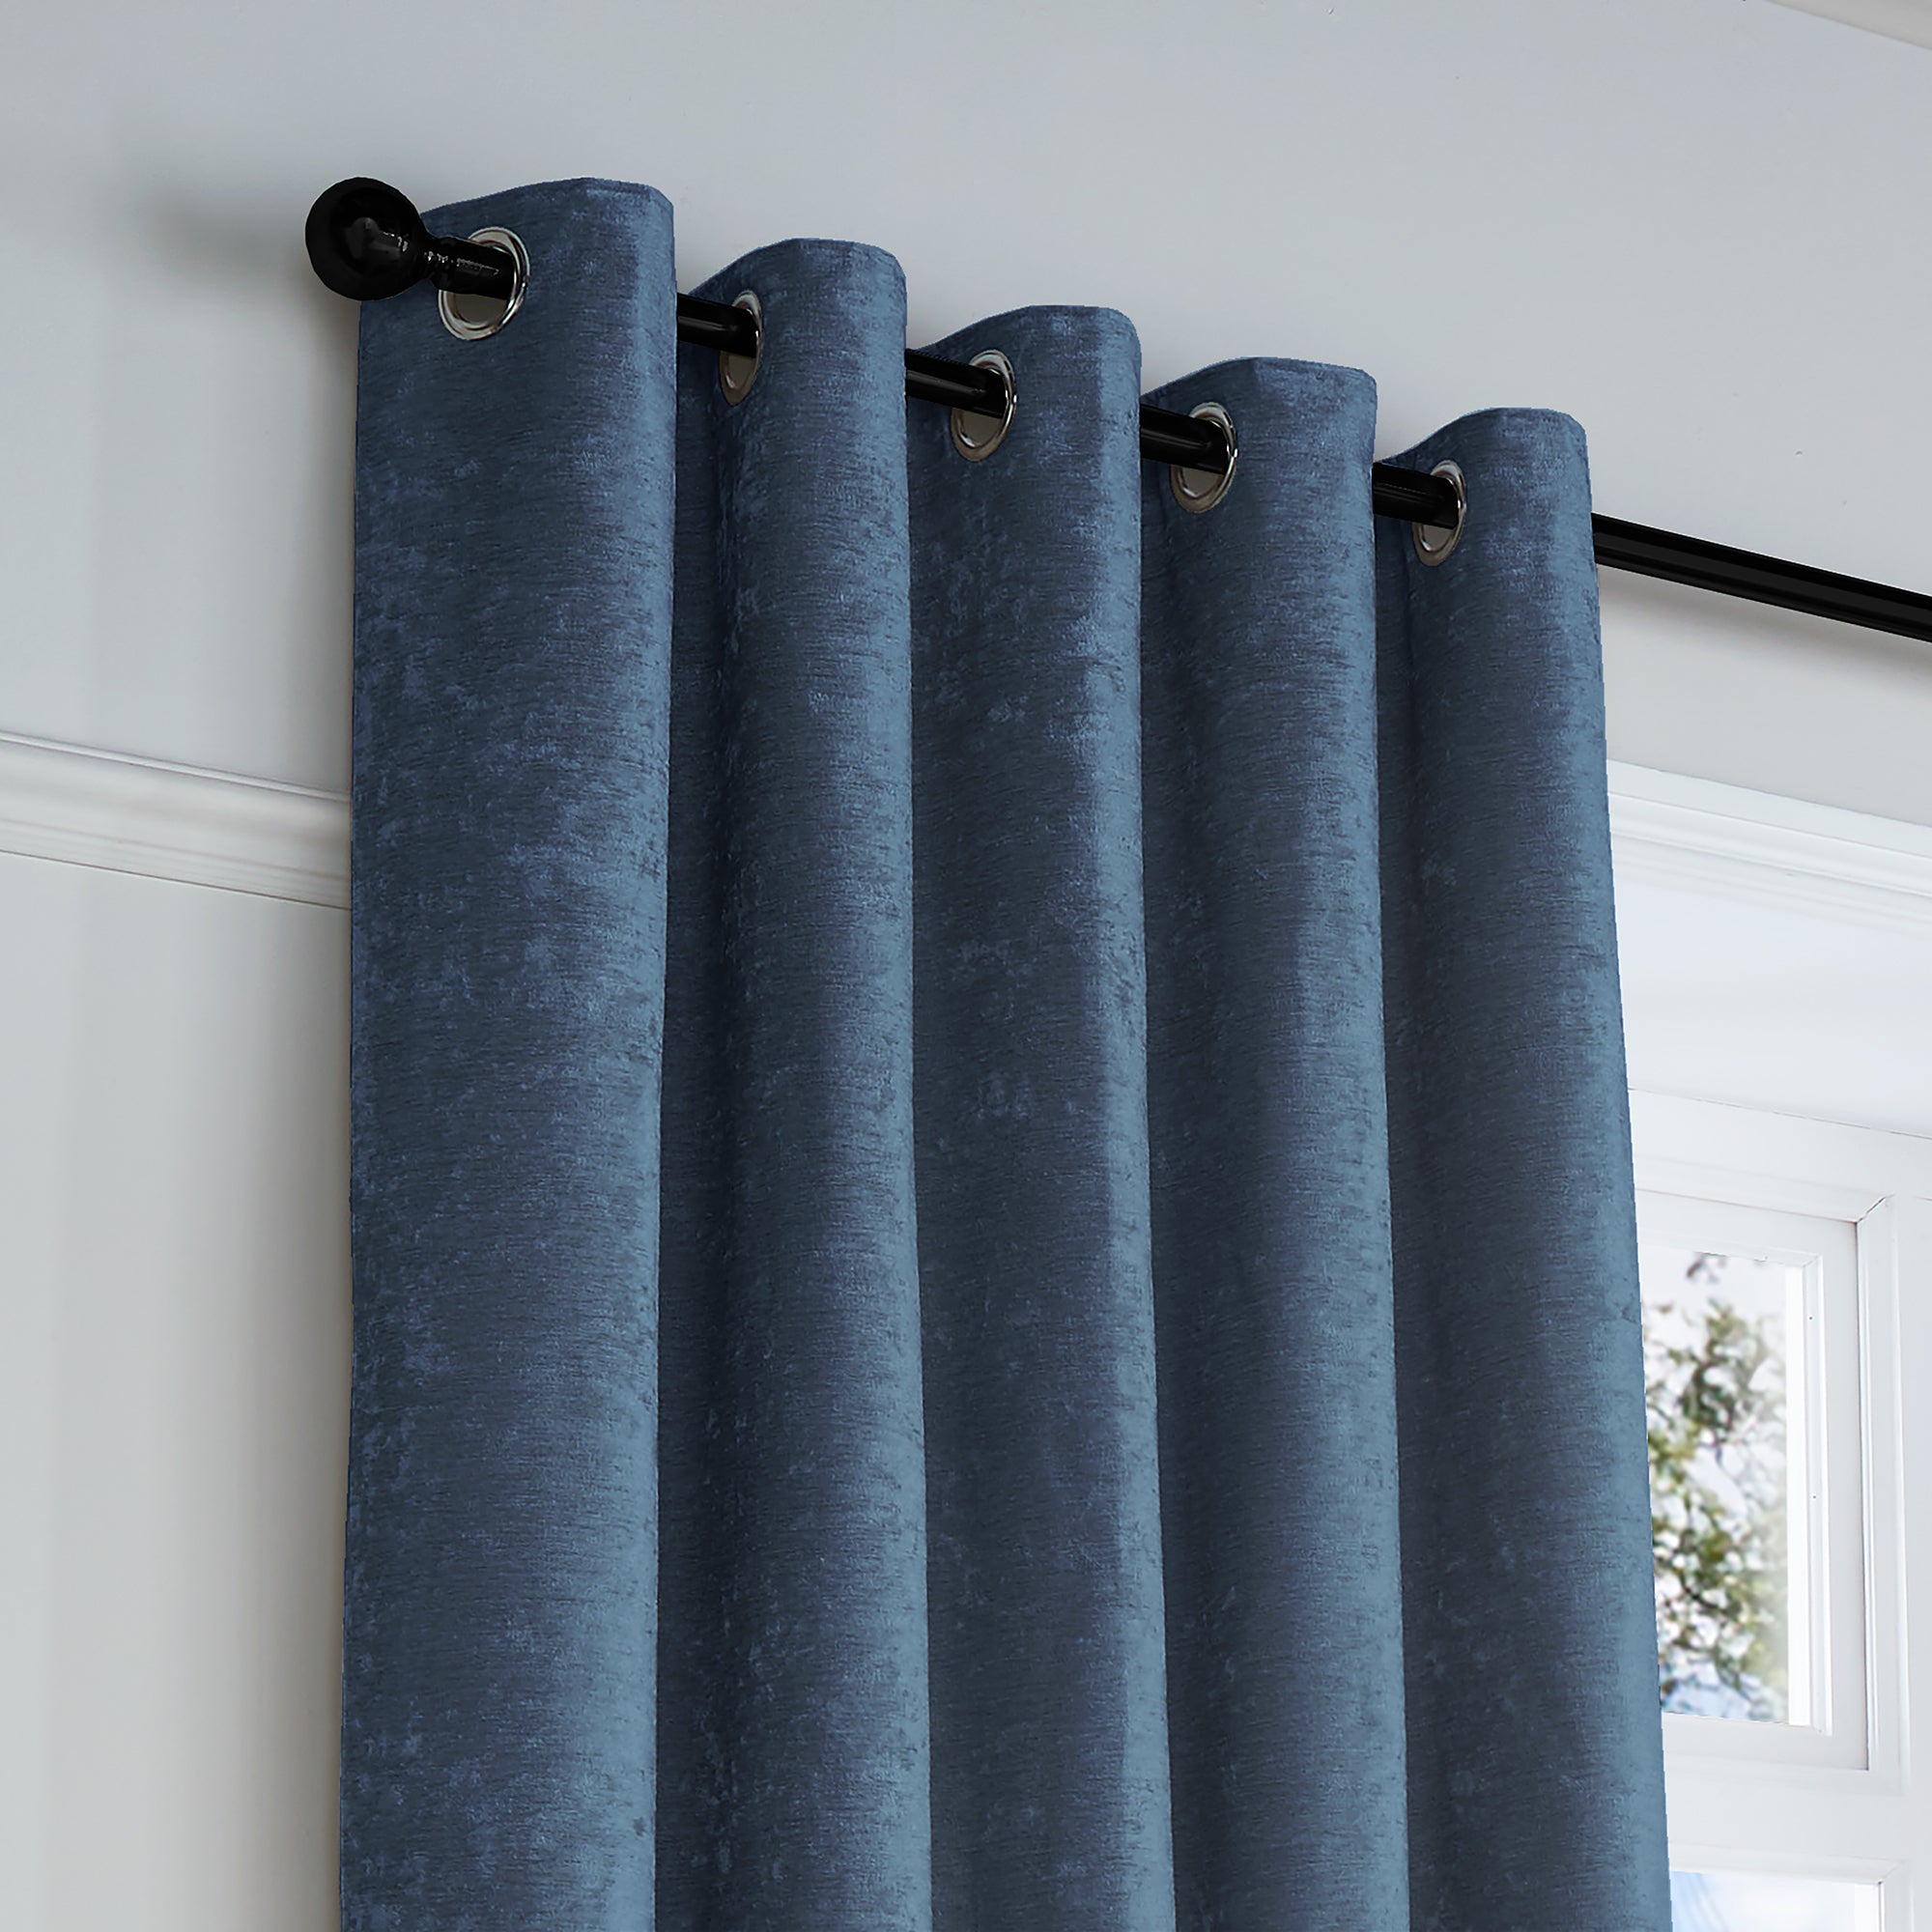 Pair of Eyelet Curtains Textured Chenille by Curtina in Navy